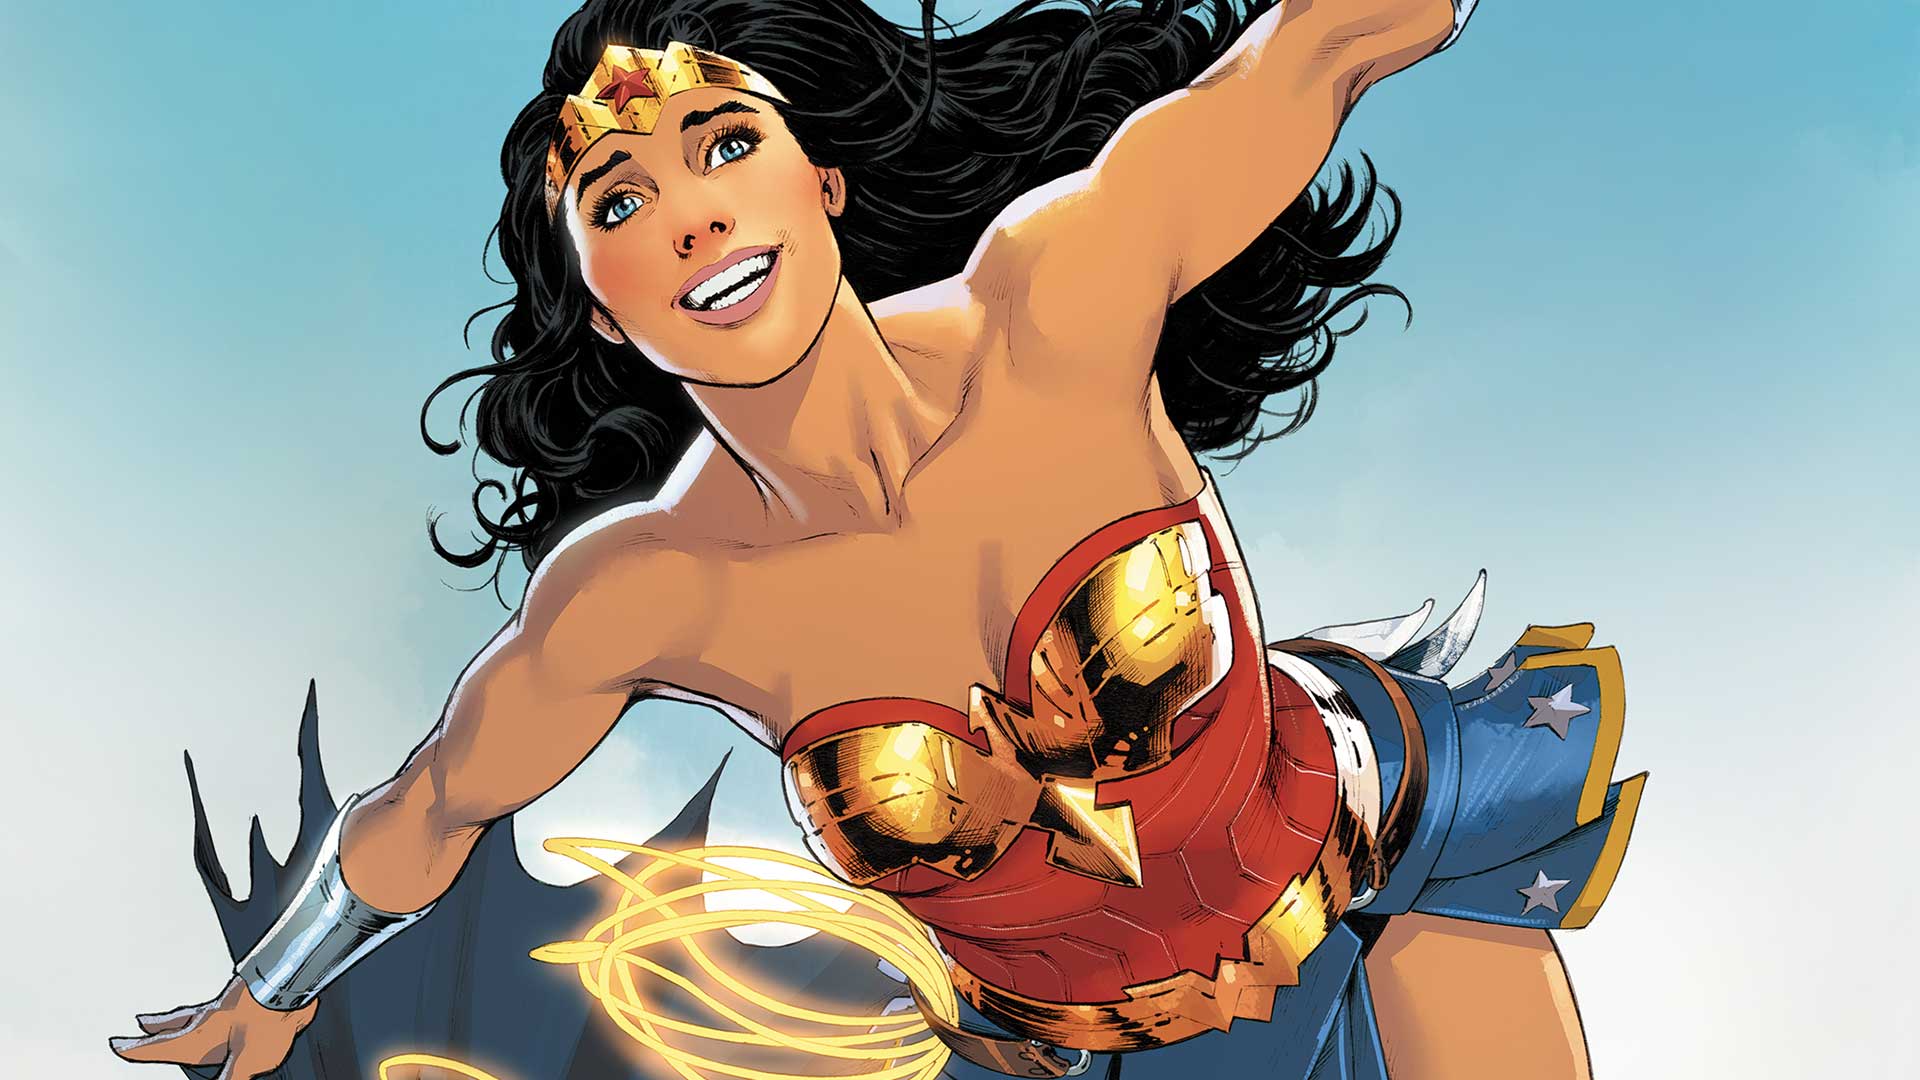 Wonder Woman Annual #1 Review